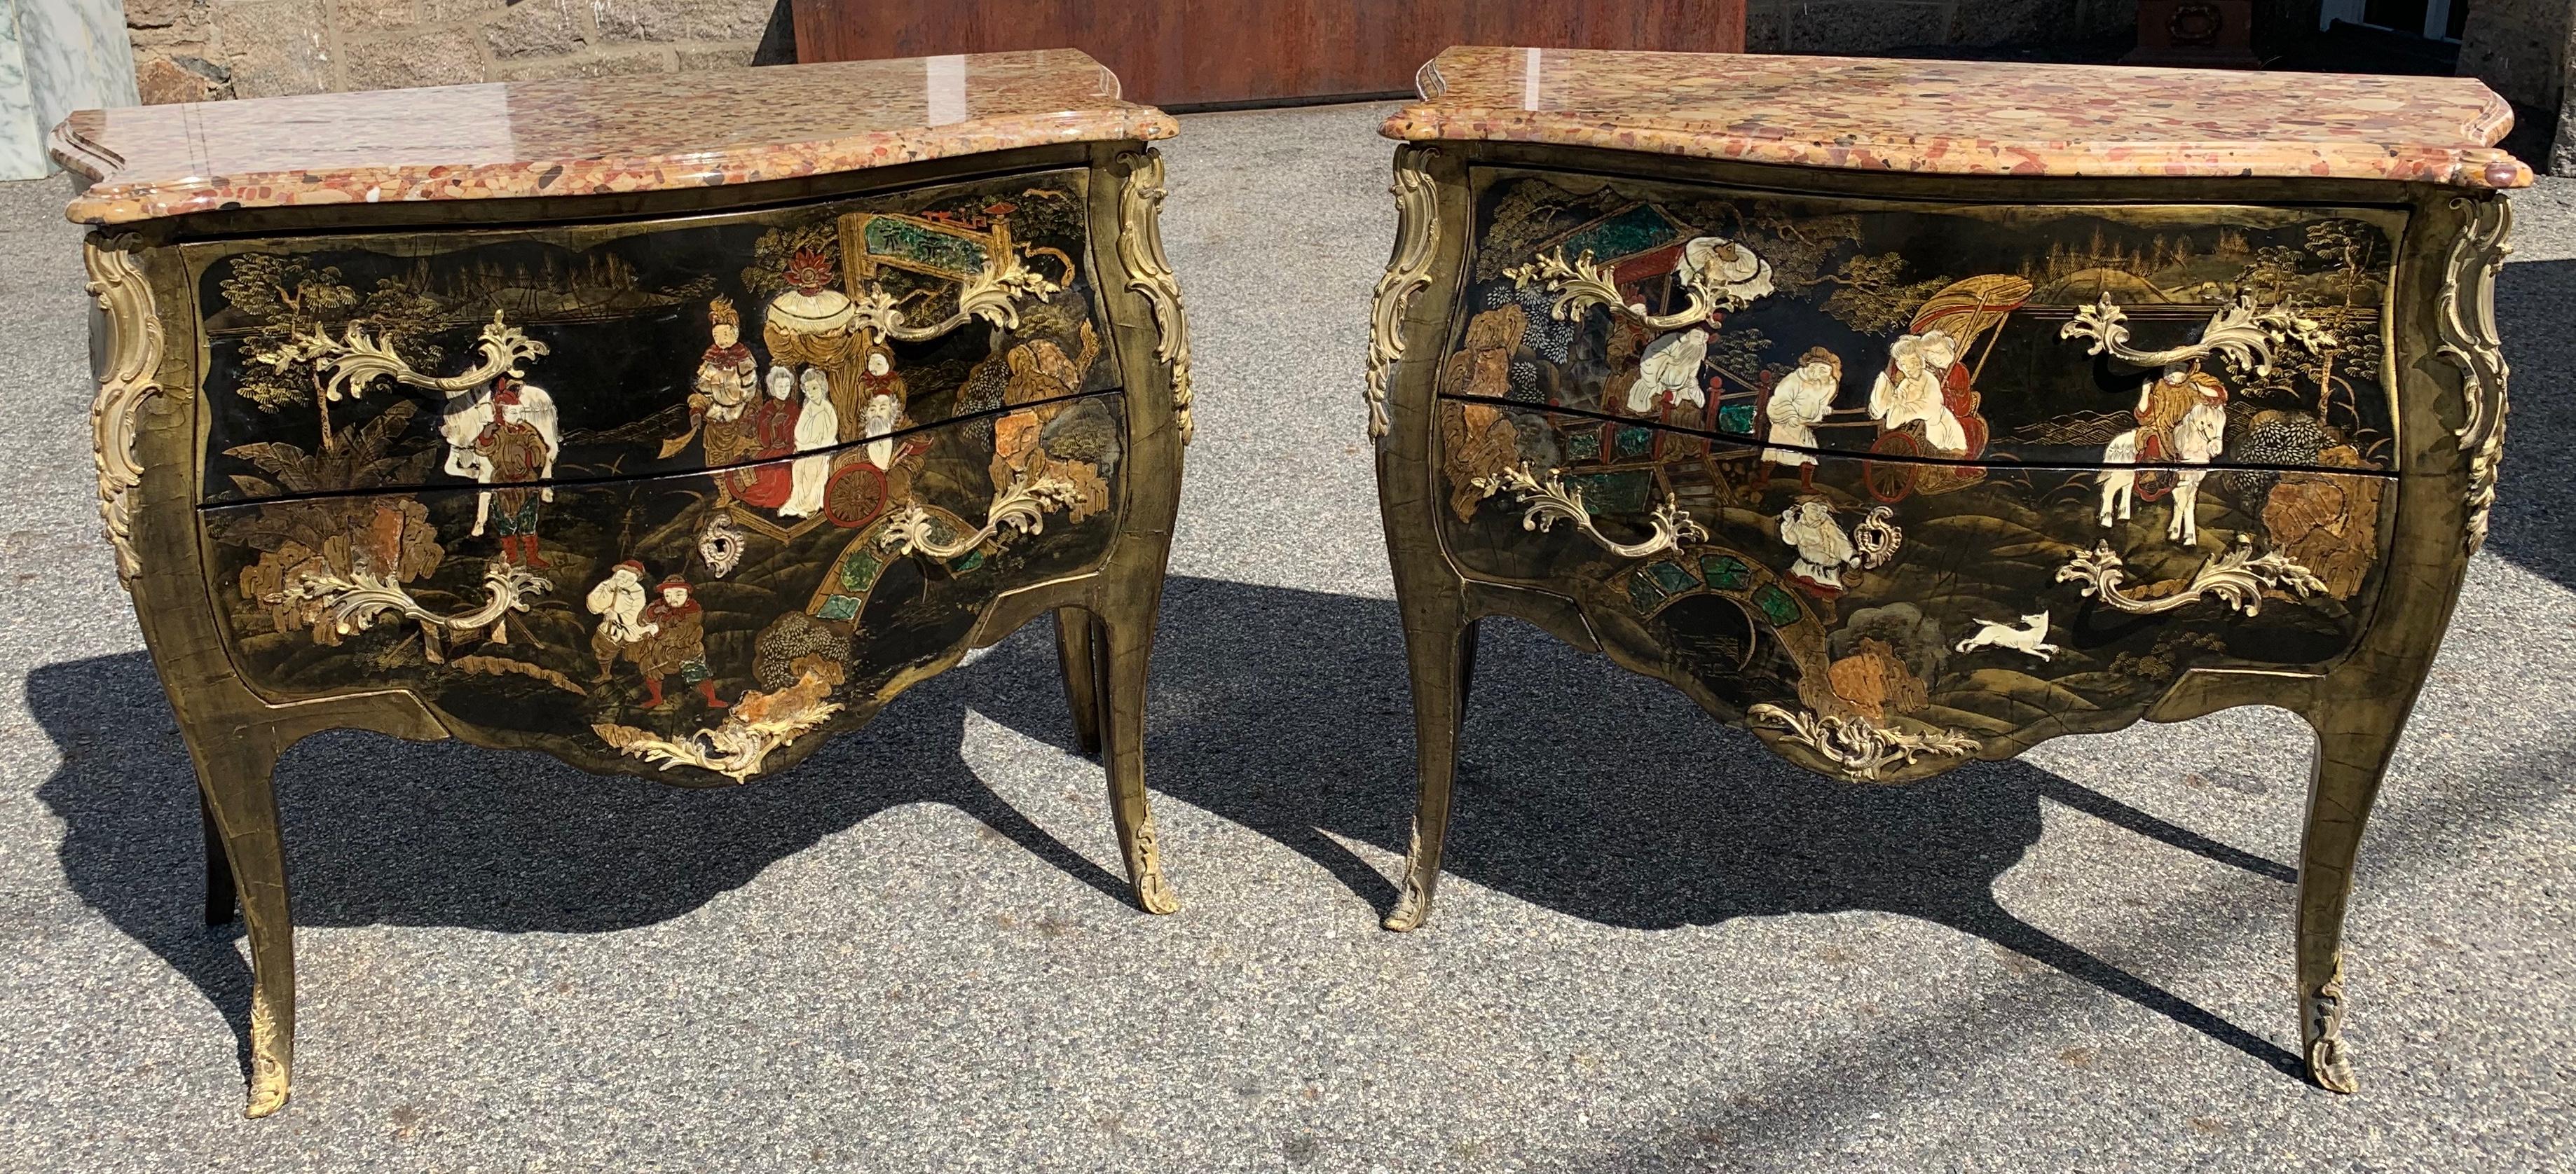 Pair of 19th century Louis XV Style chinoiserie or Japanned bombe commodes with original marble tops
Ormolu Mounts and beautifully executed Chinoise scenes of figures, horses, butterflies and flowers in lacquer, mother of pearl and bone. Colors are